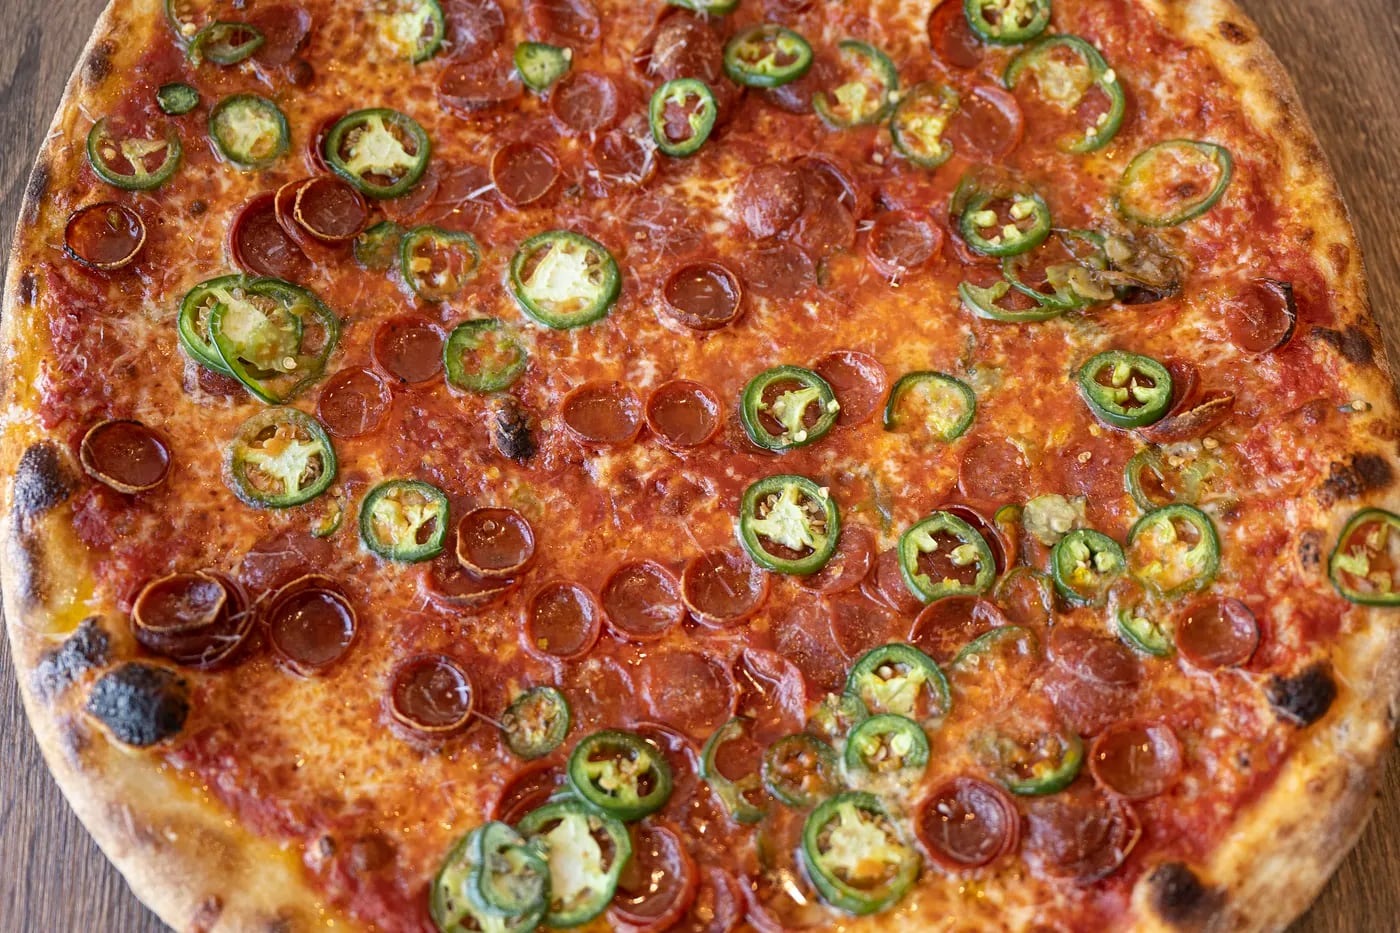 The Spicy ‘Roni blends cup and char pepperoni with fistfuls of shaved jalapeños at Bakeria 1010.